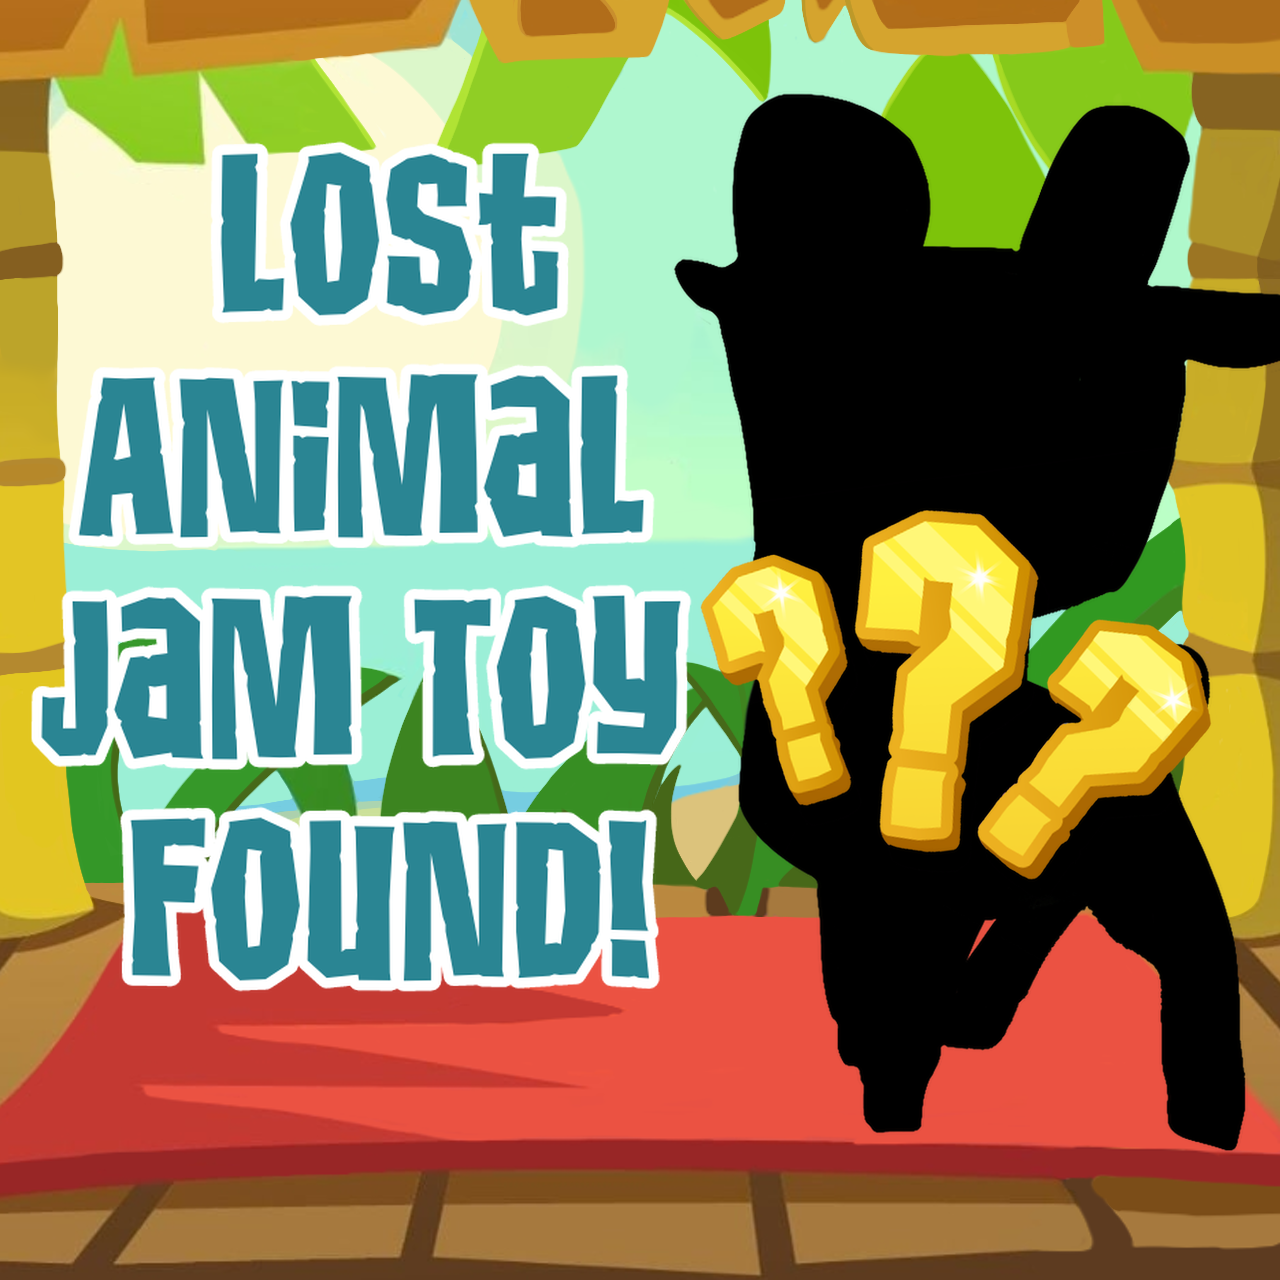 ONE-OF-A-KIND Animal Jam Toy Unboxing! — Animal Jam Archives